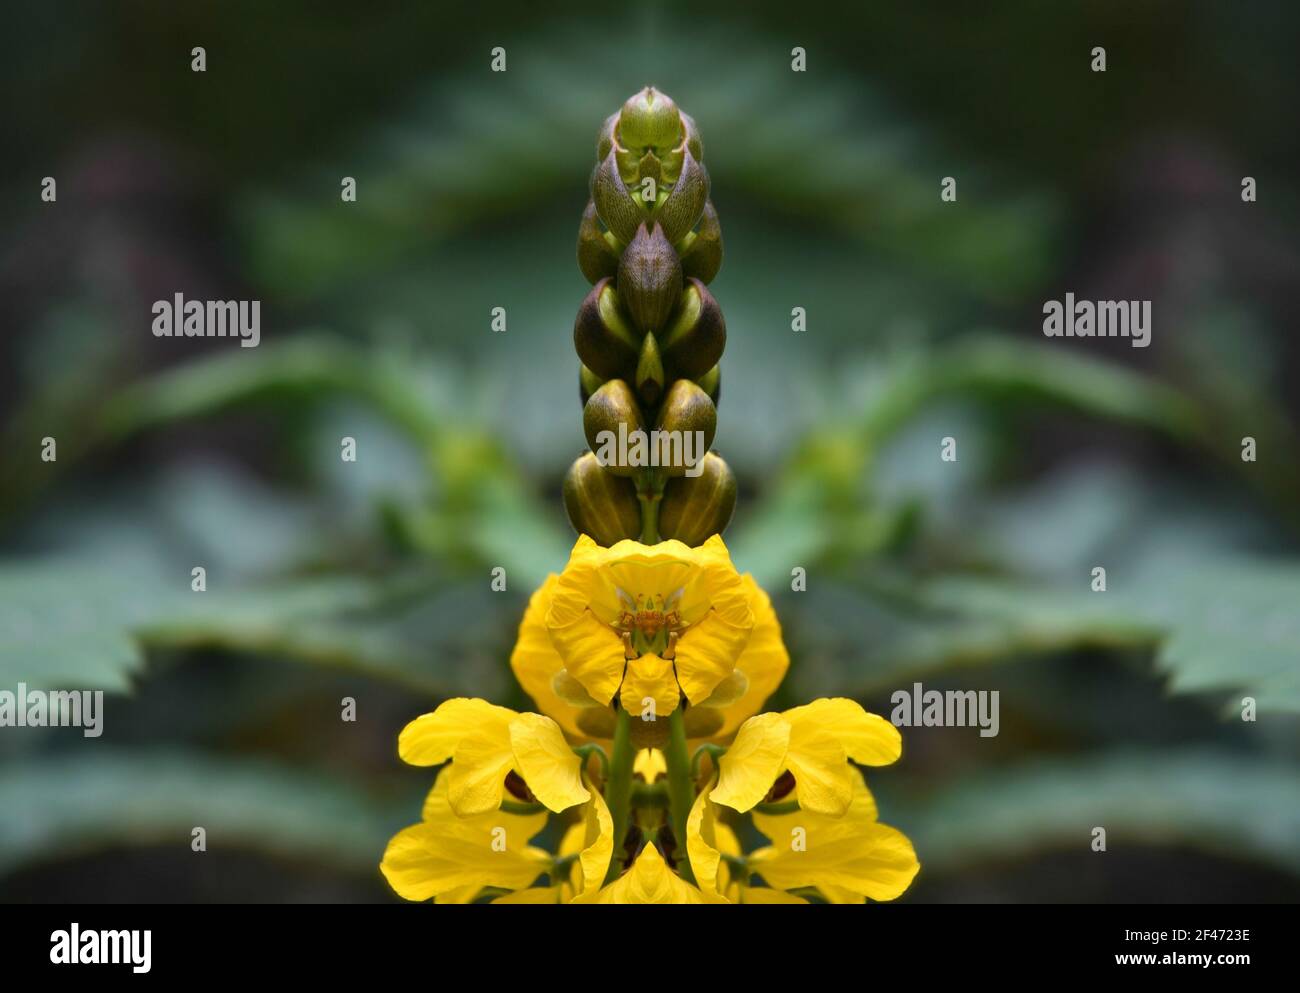 Senna Didymobotrya (Candelabra tree) buds and blooms on an abstract composition. Stock Photo